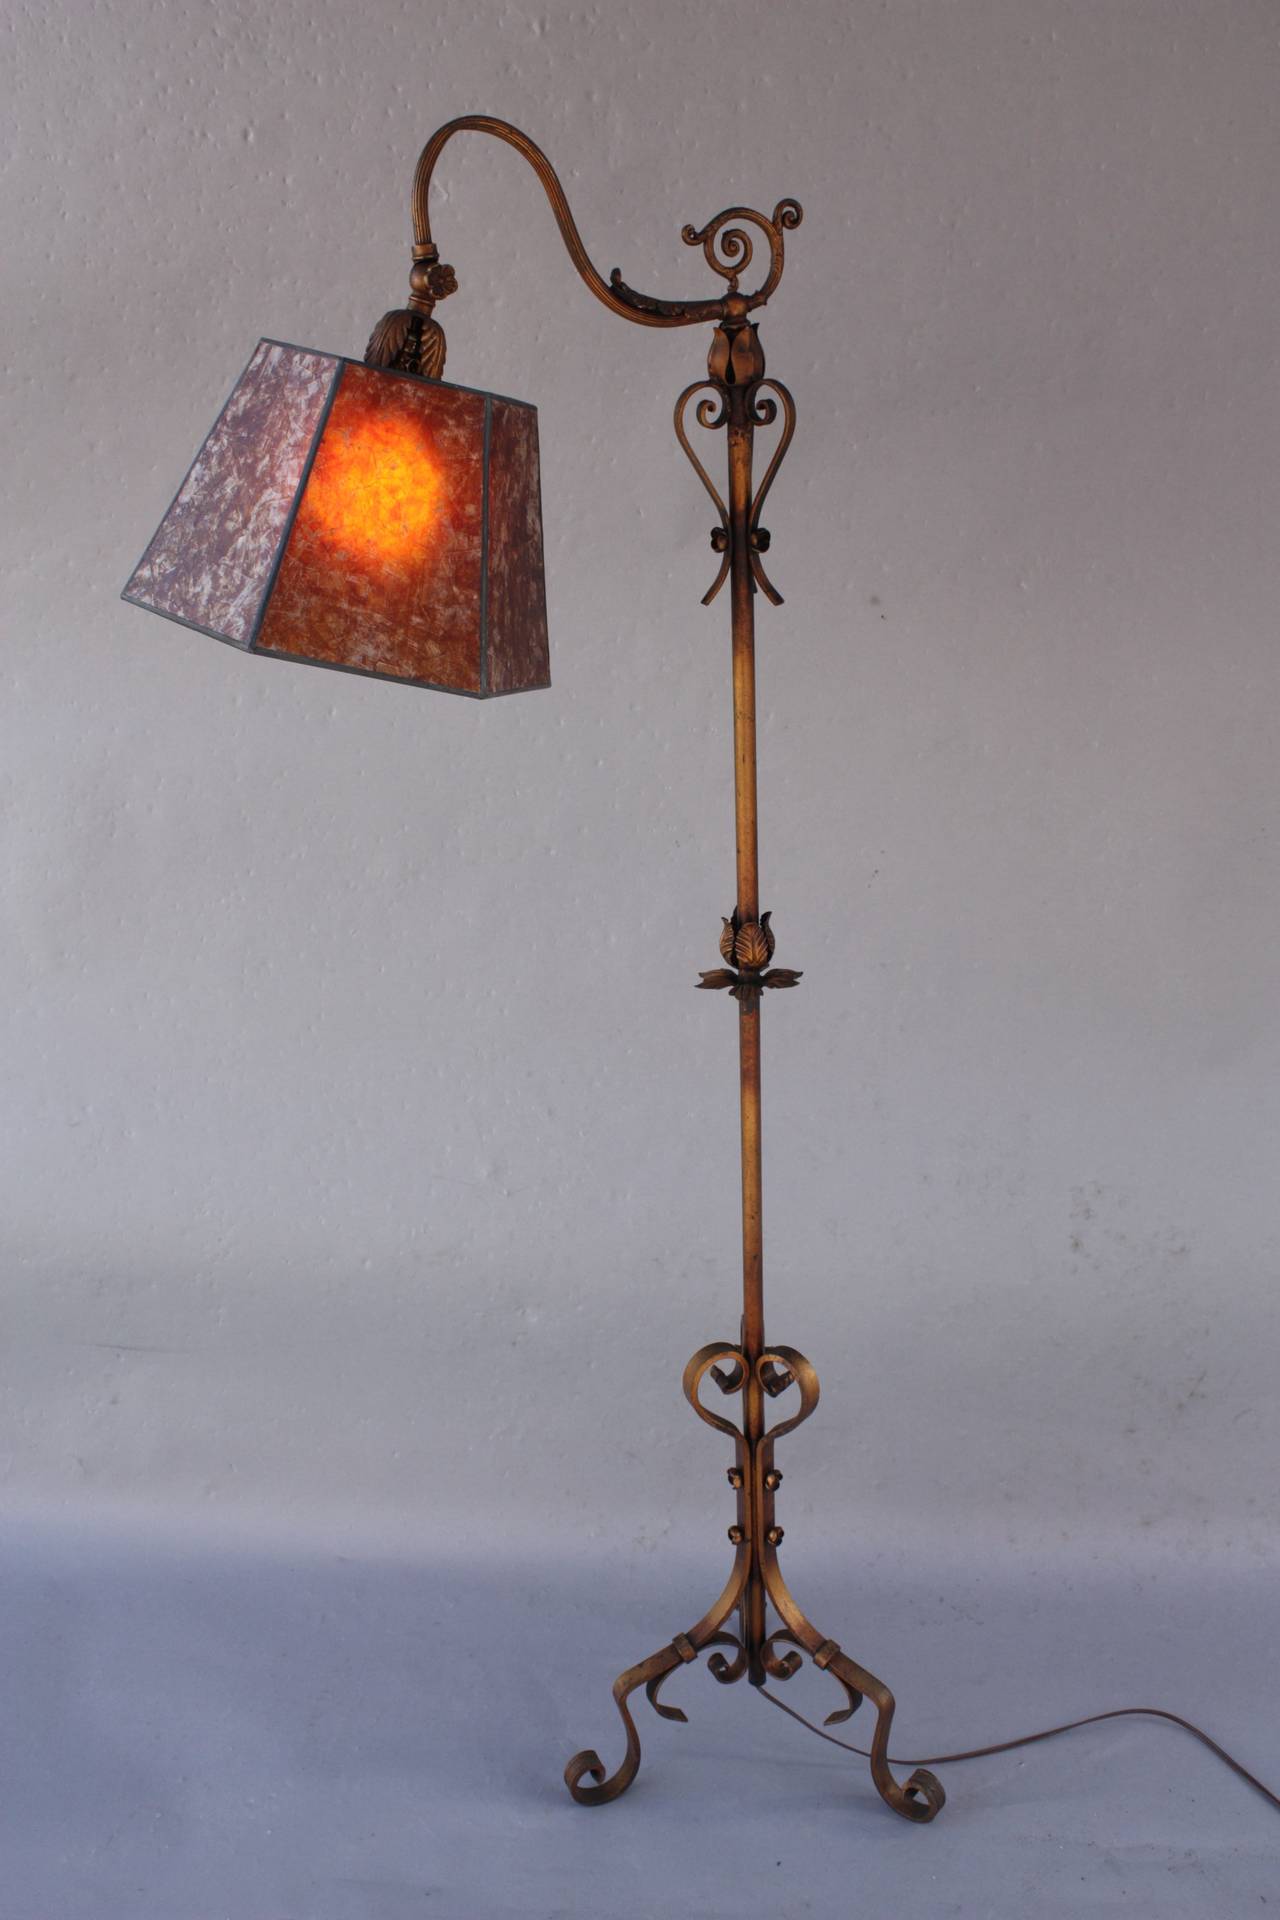 Circa 1930's floor lamp with wonderful base. The shade is a new mica shade. The lamp measures 57